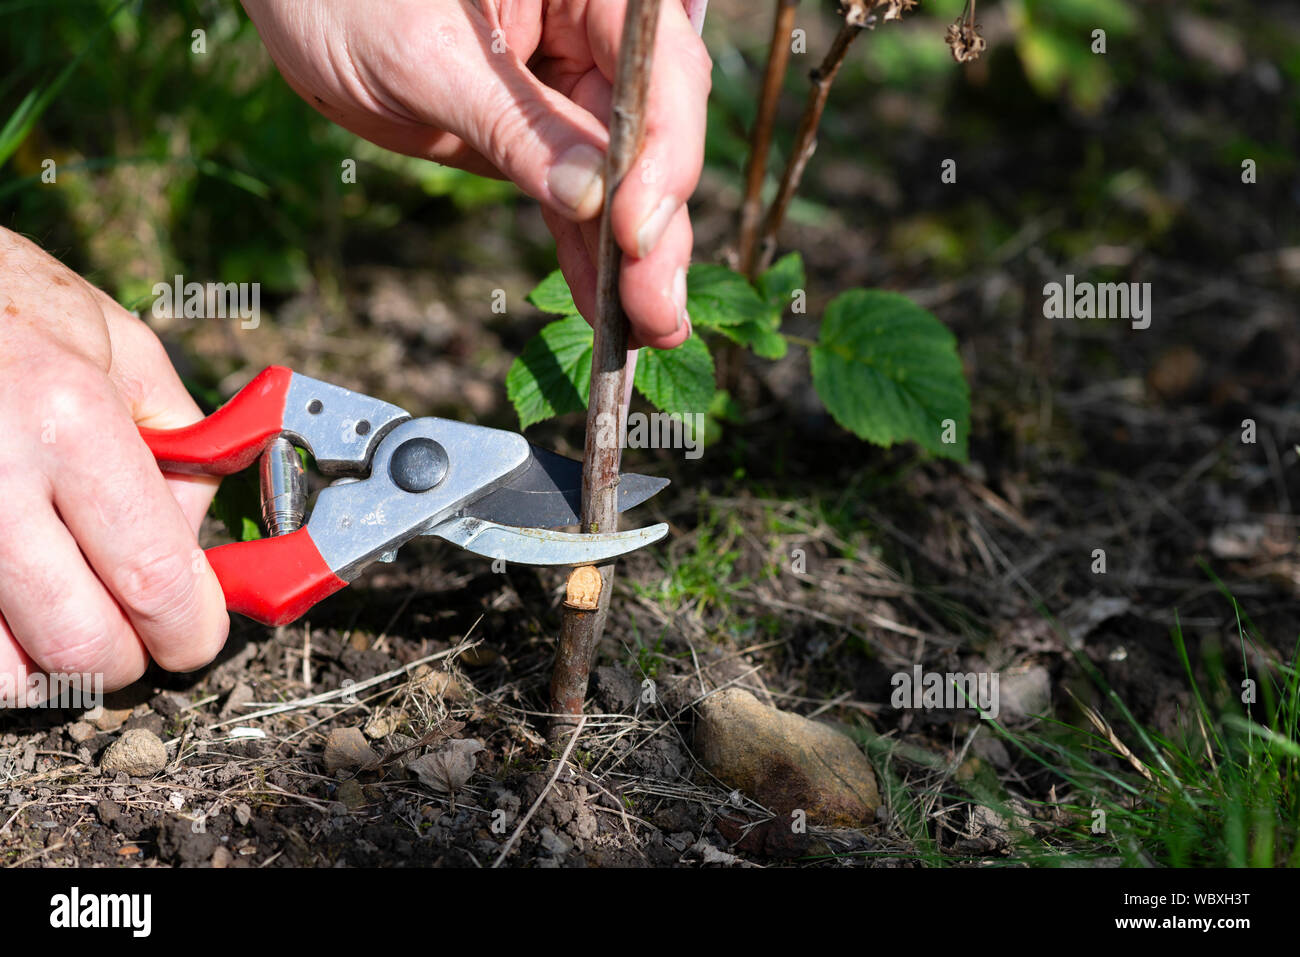 Cutting back raspberry canes in a kitchen garden.  South Yorkshire, England. Stock Photo